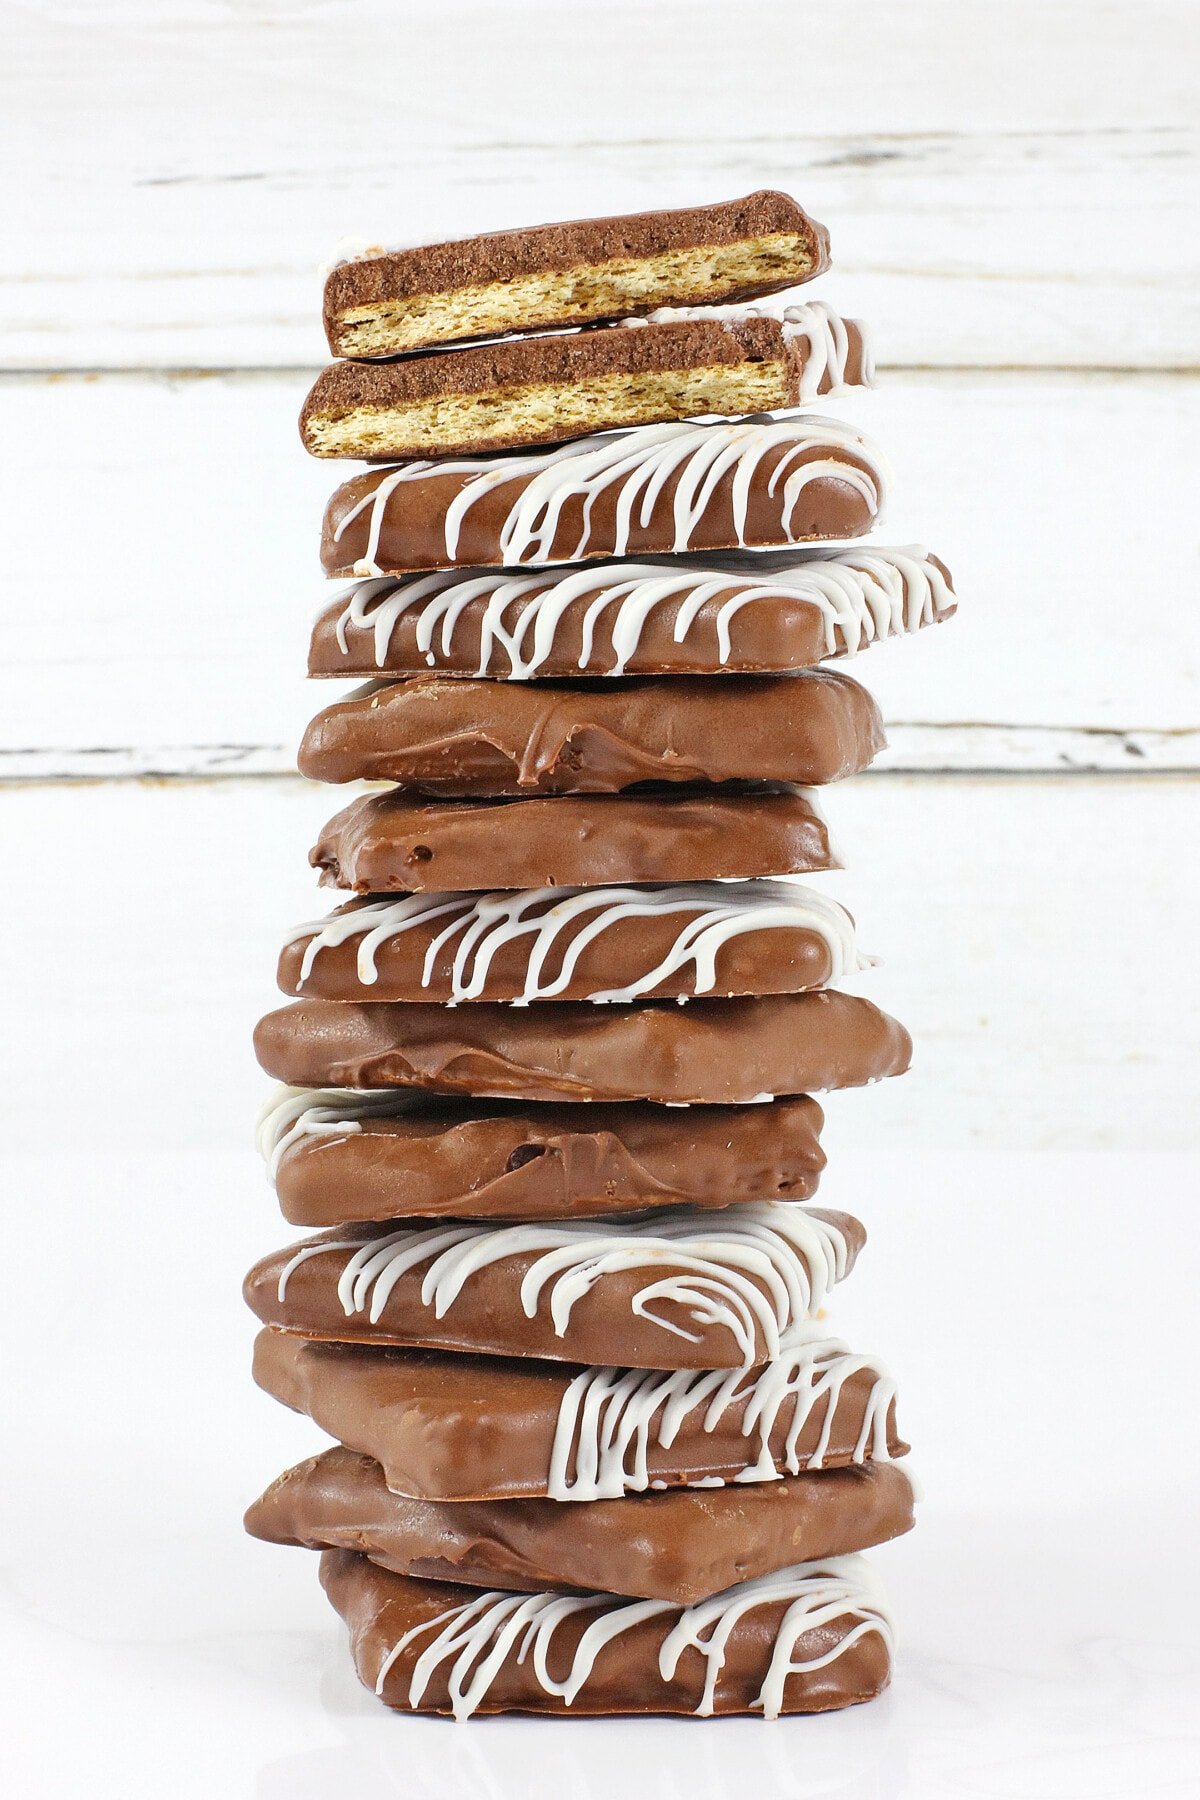 A large stack of chocolate covered graham crackers.